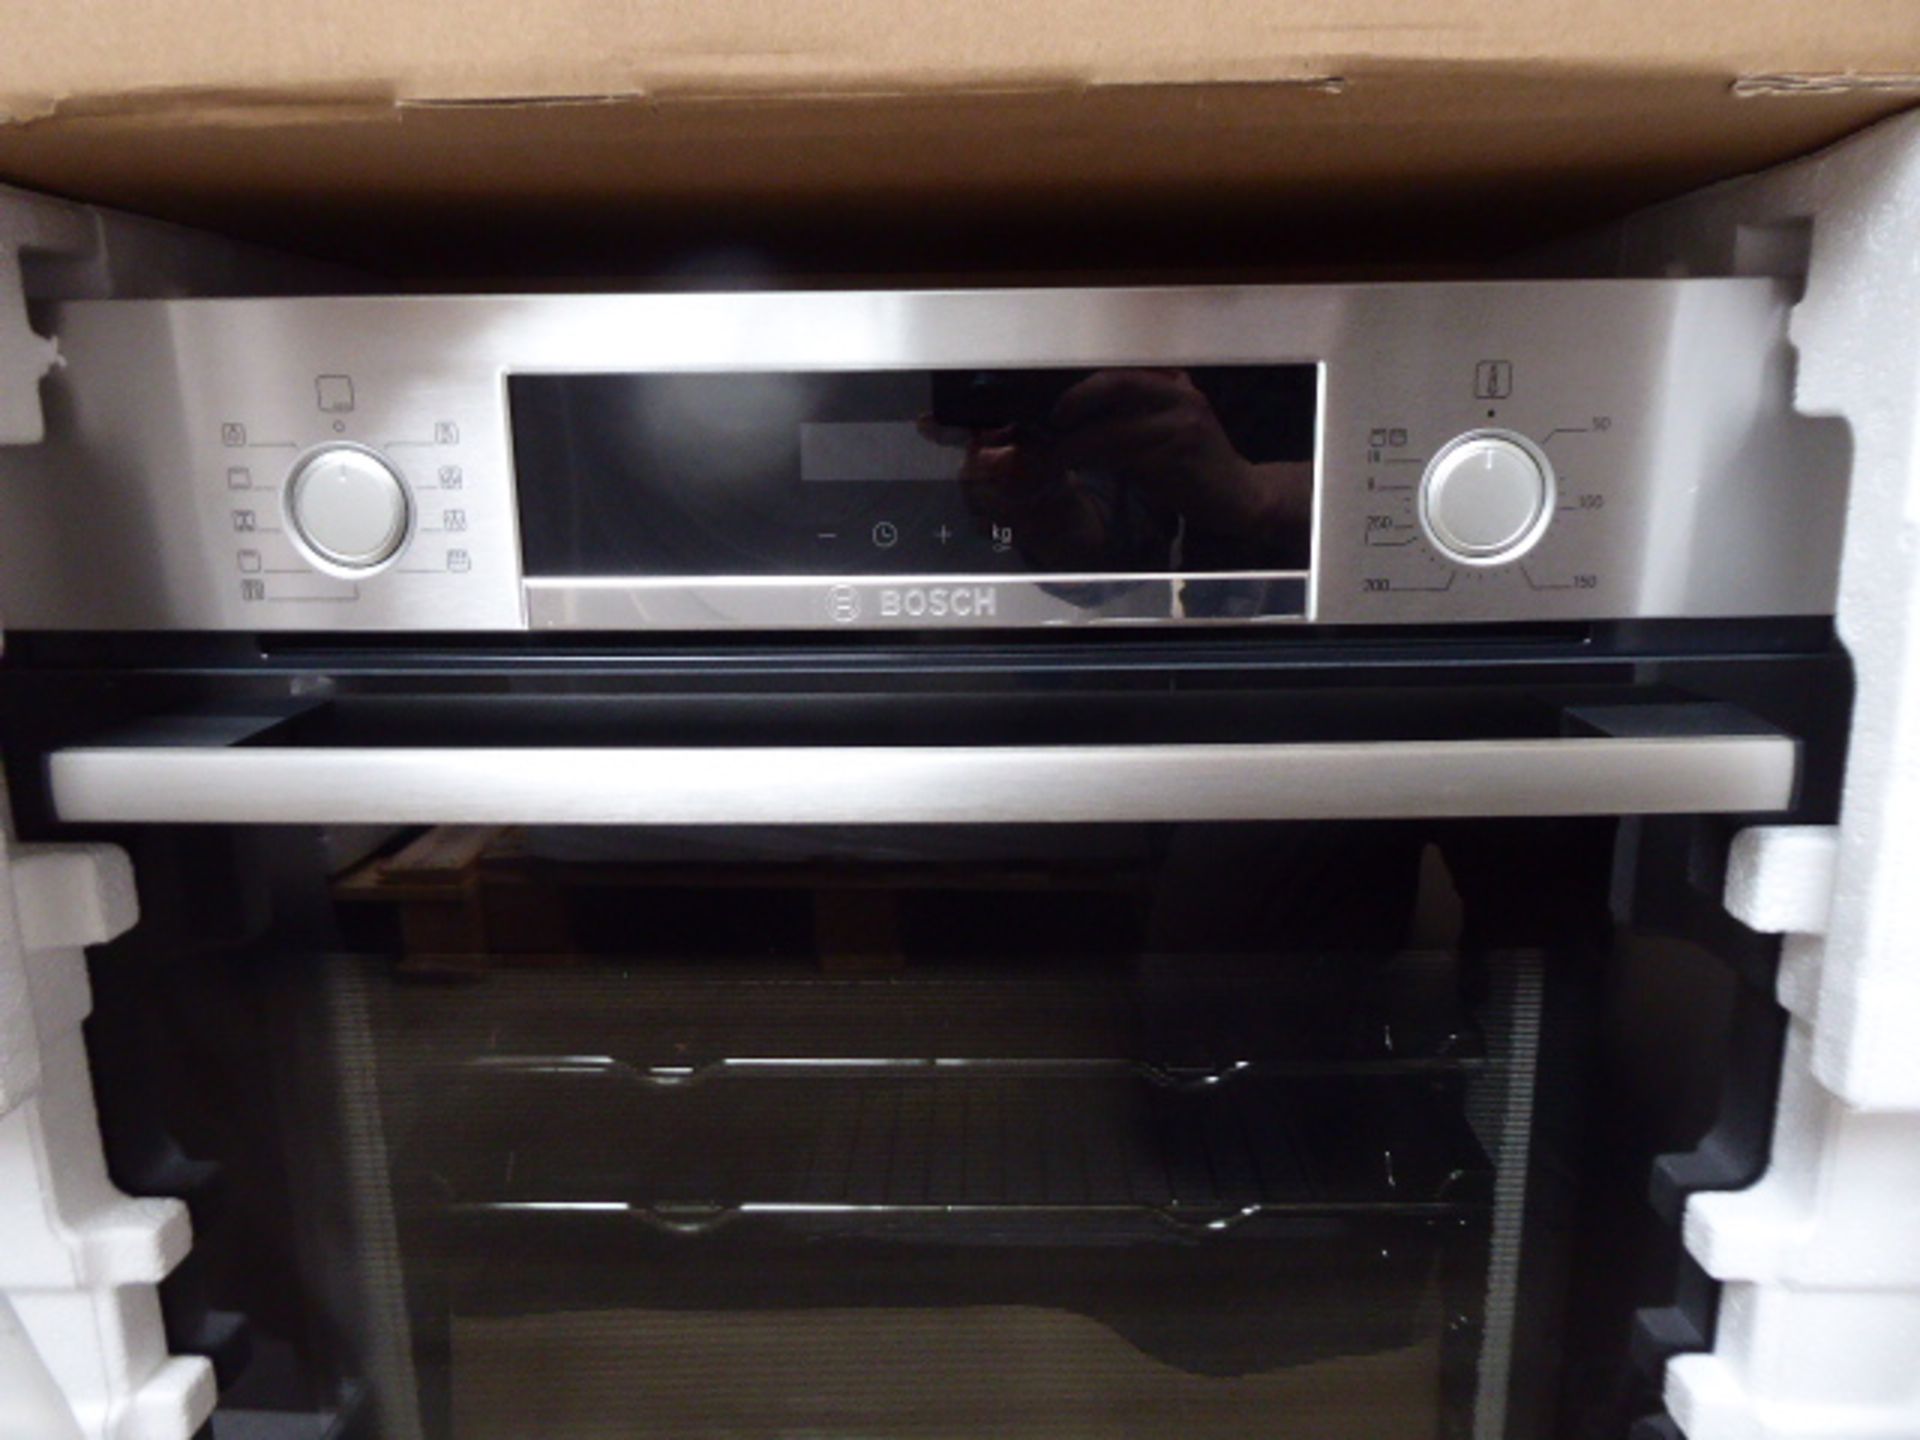 HBS573BS0BB Bosch Oven - Image 2 of 2